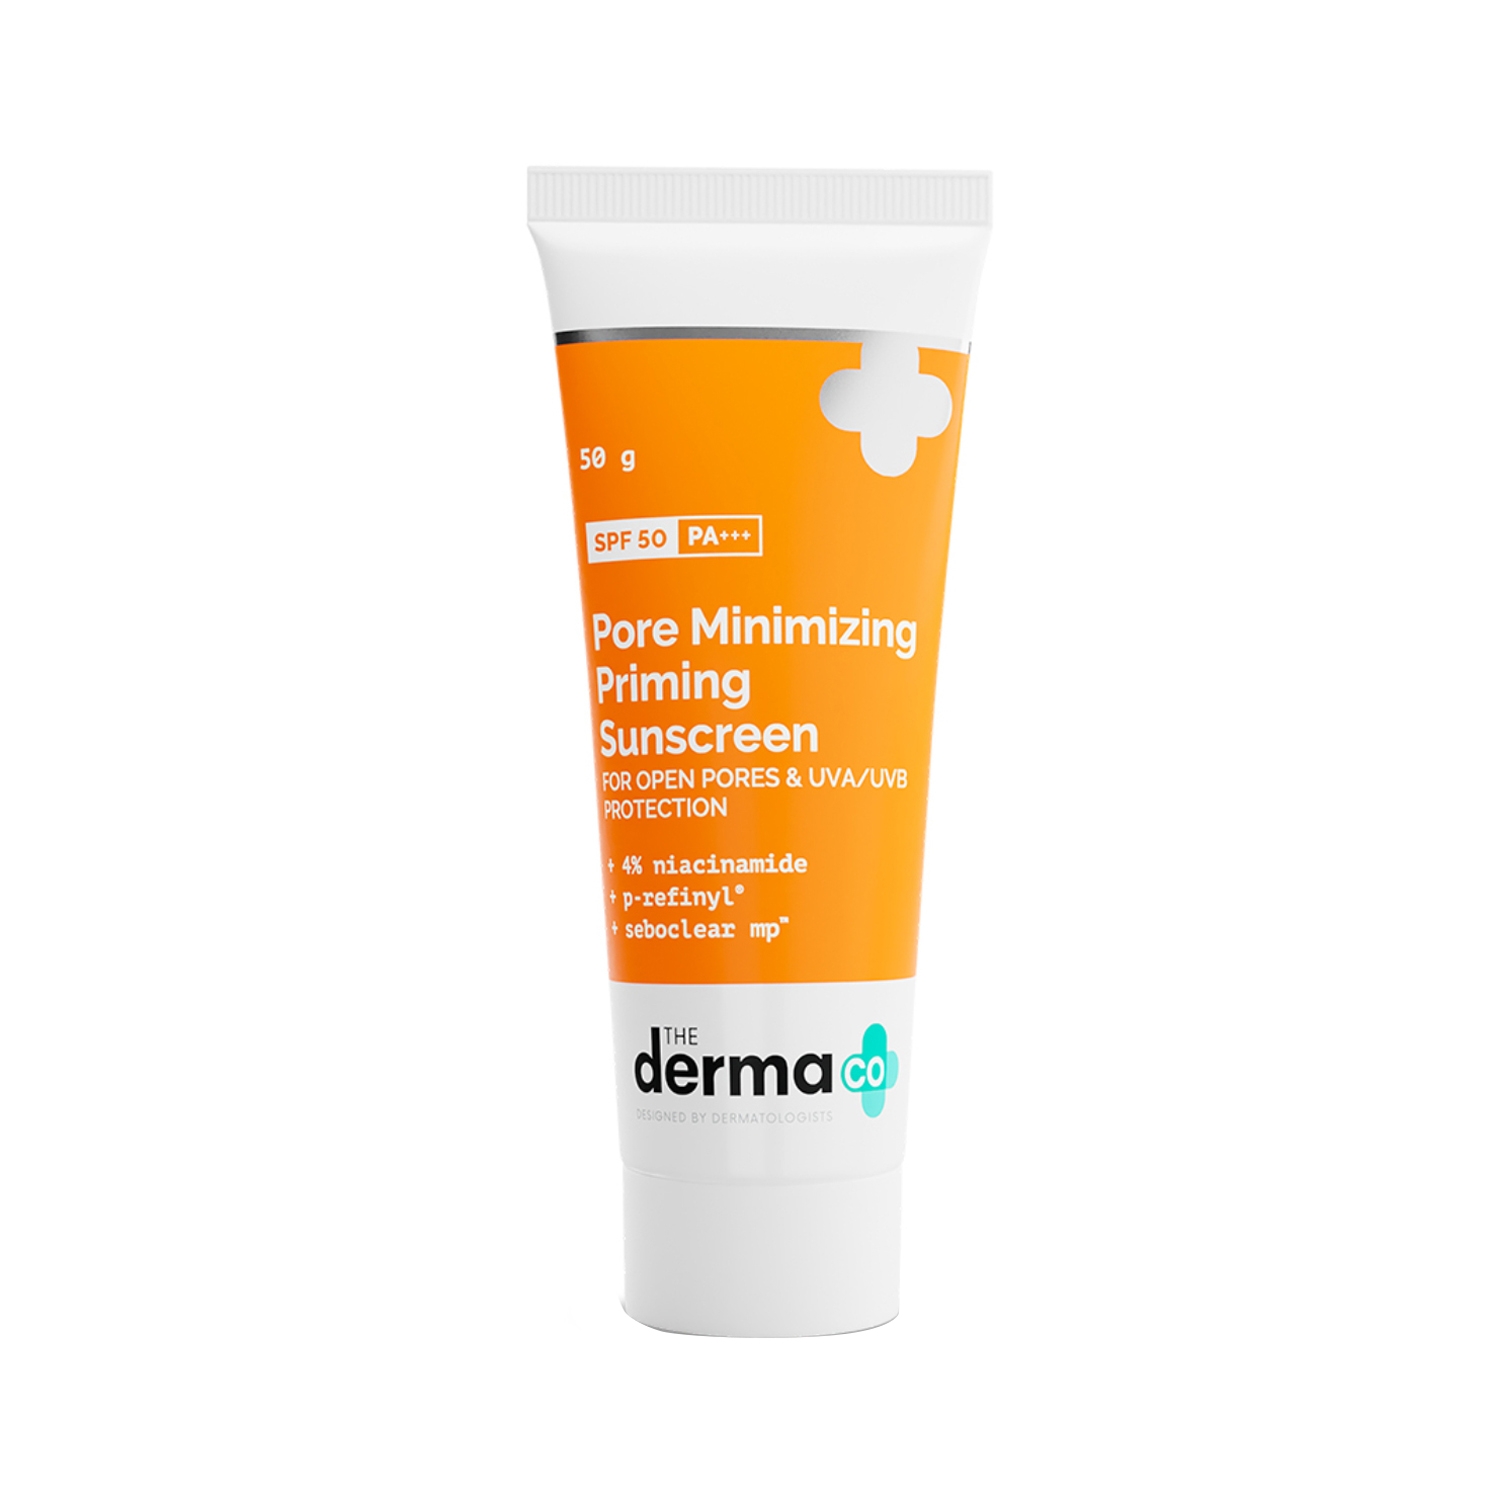 The Derma Co | The Derma Co Pore Minimizing Priming Sunscreen With SPF 50 PA++ (50g)